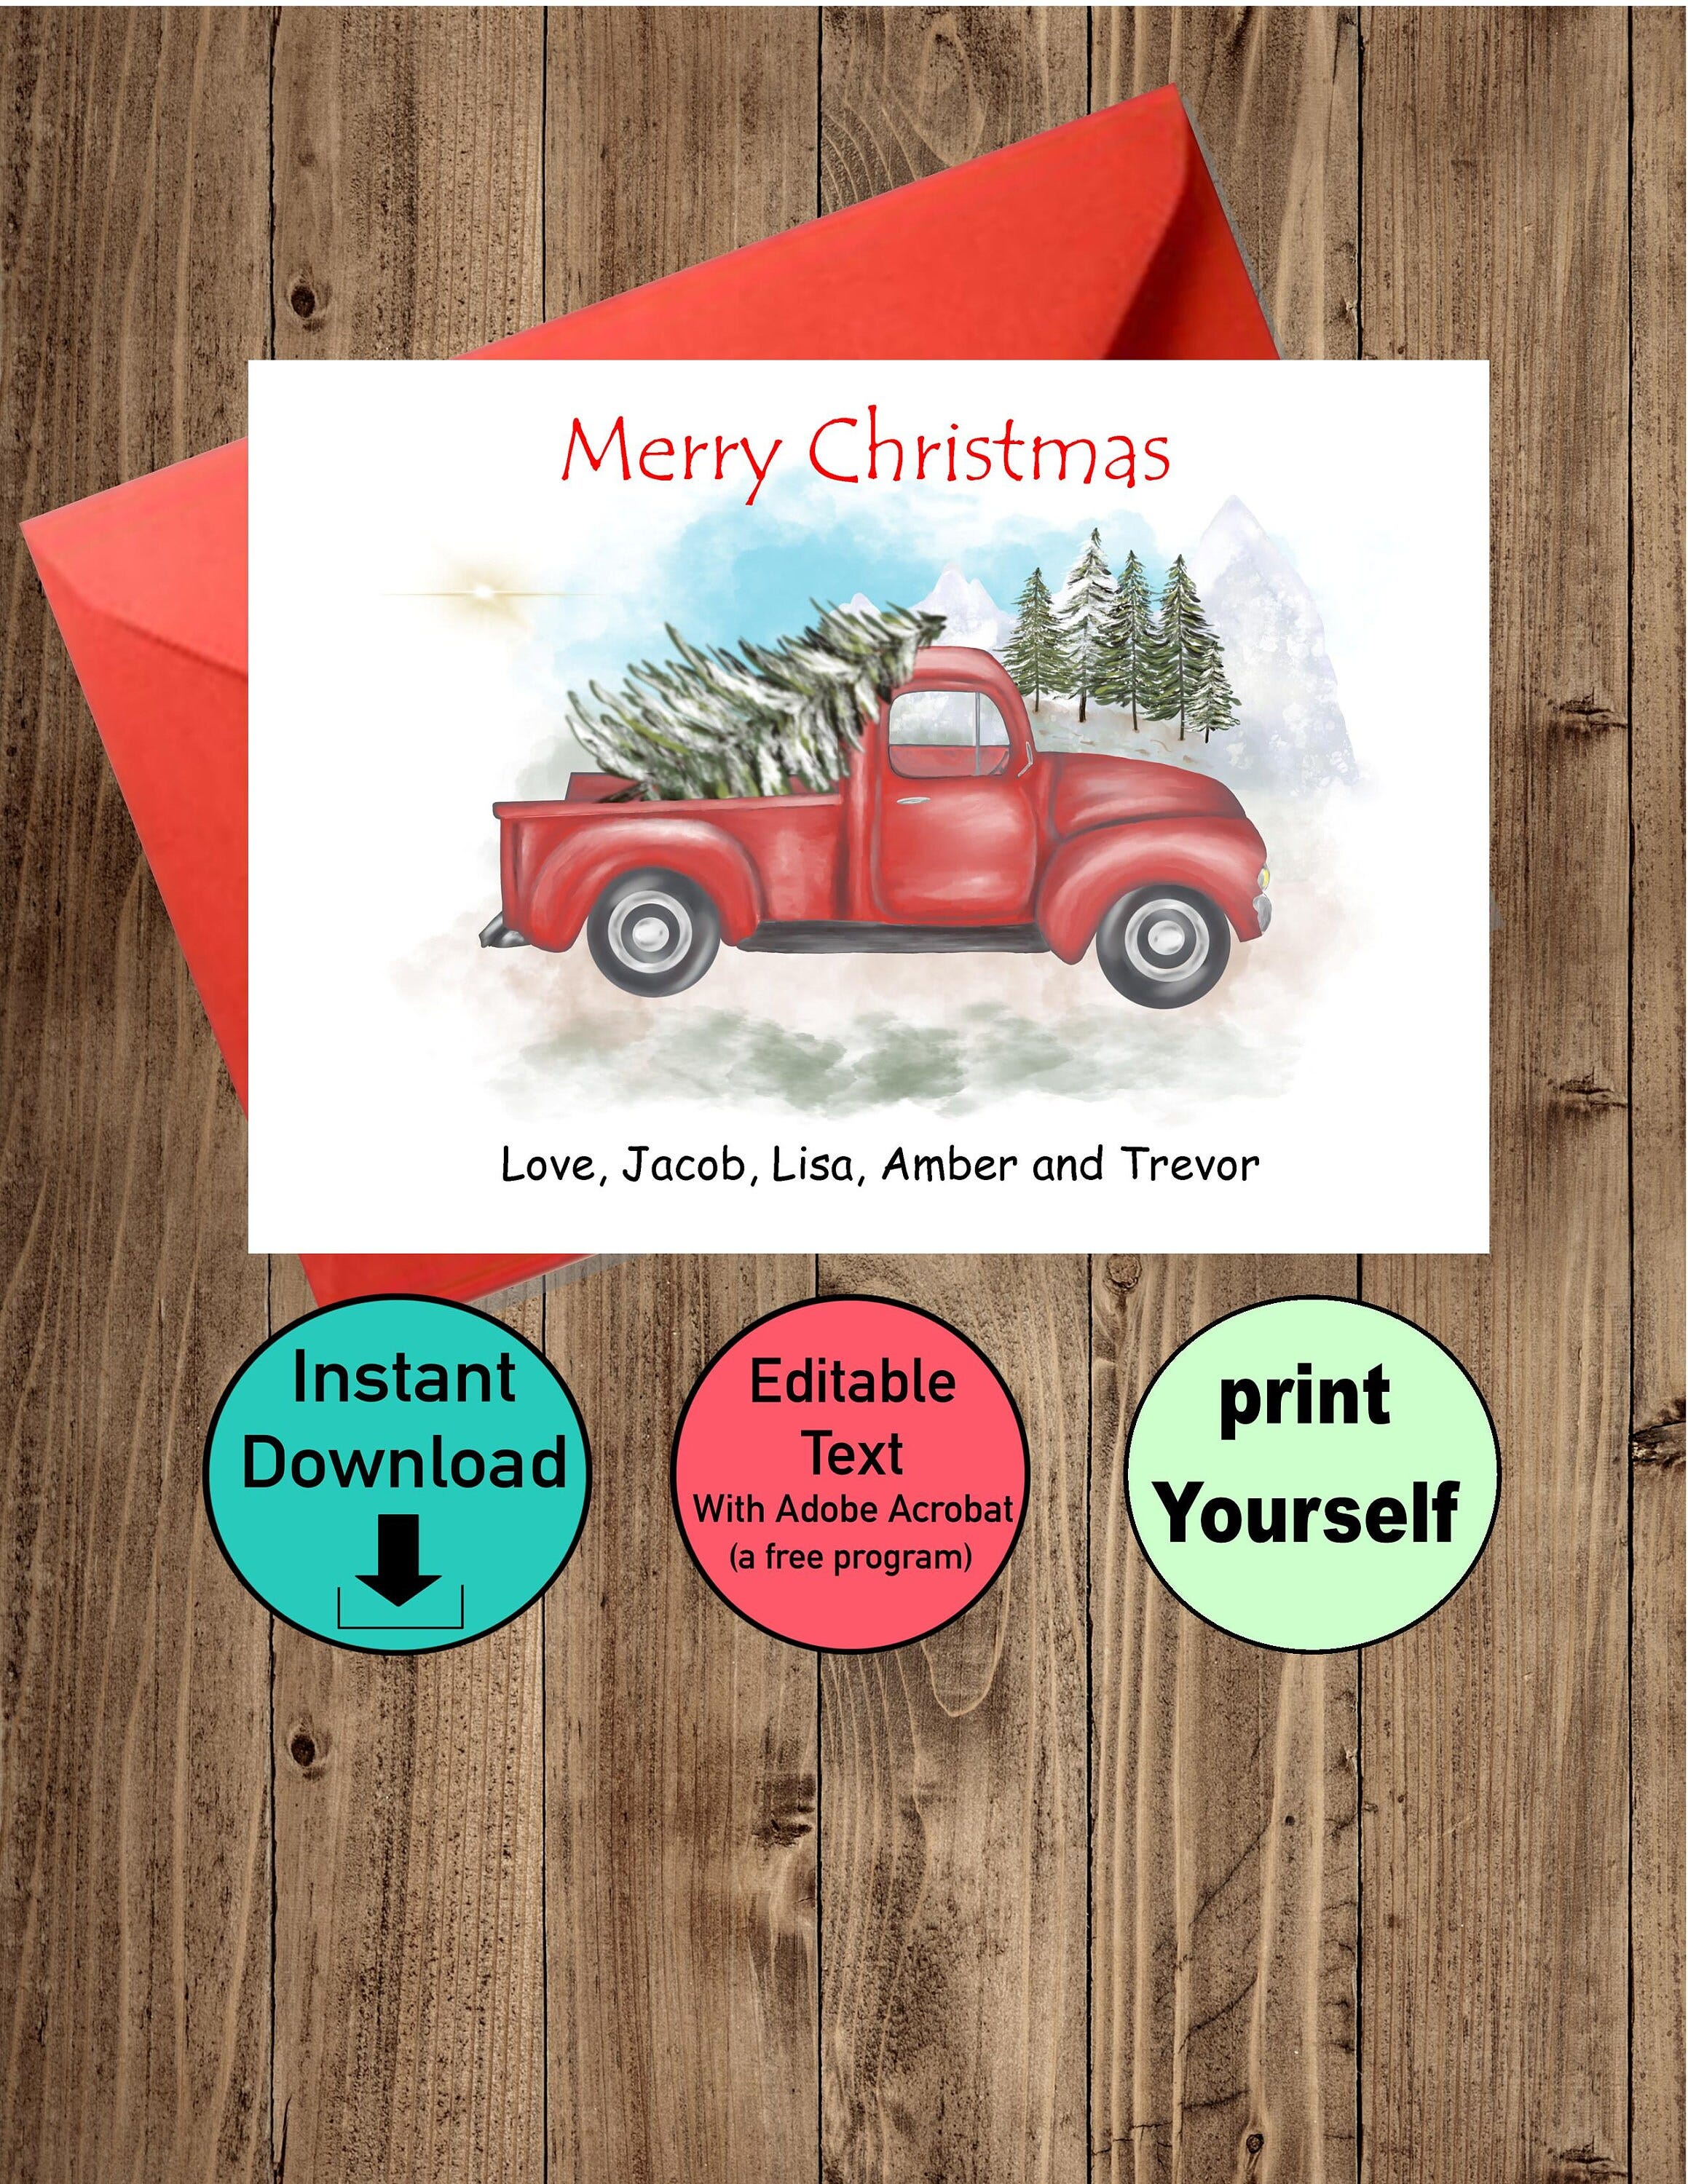 Merry Christmas vintage red truck card with Christmas tree, do it yourself - Instant download - you edit & print, digital Pdf file #cd20011